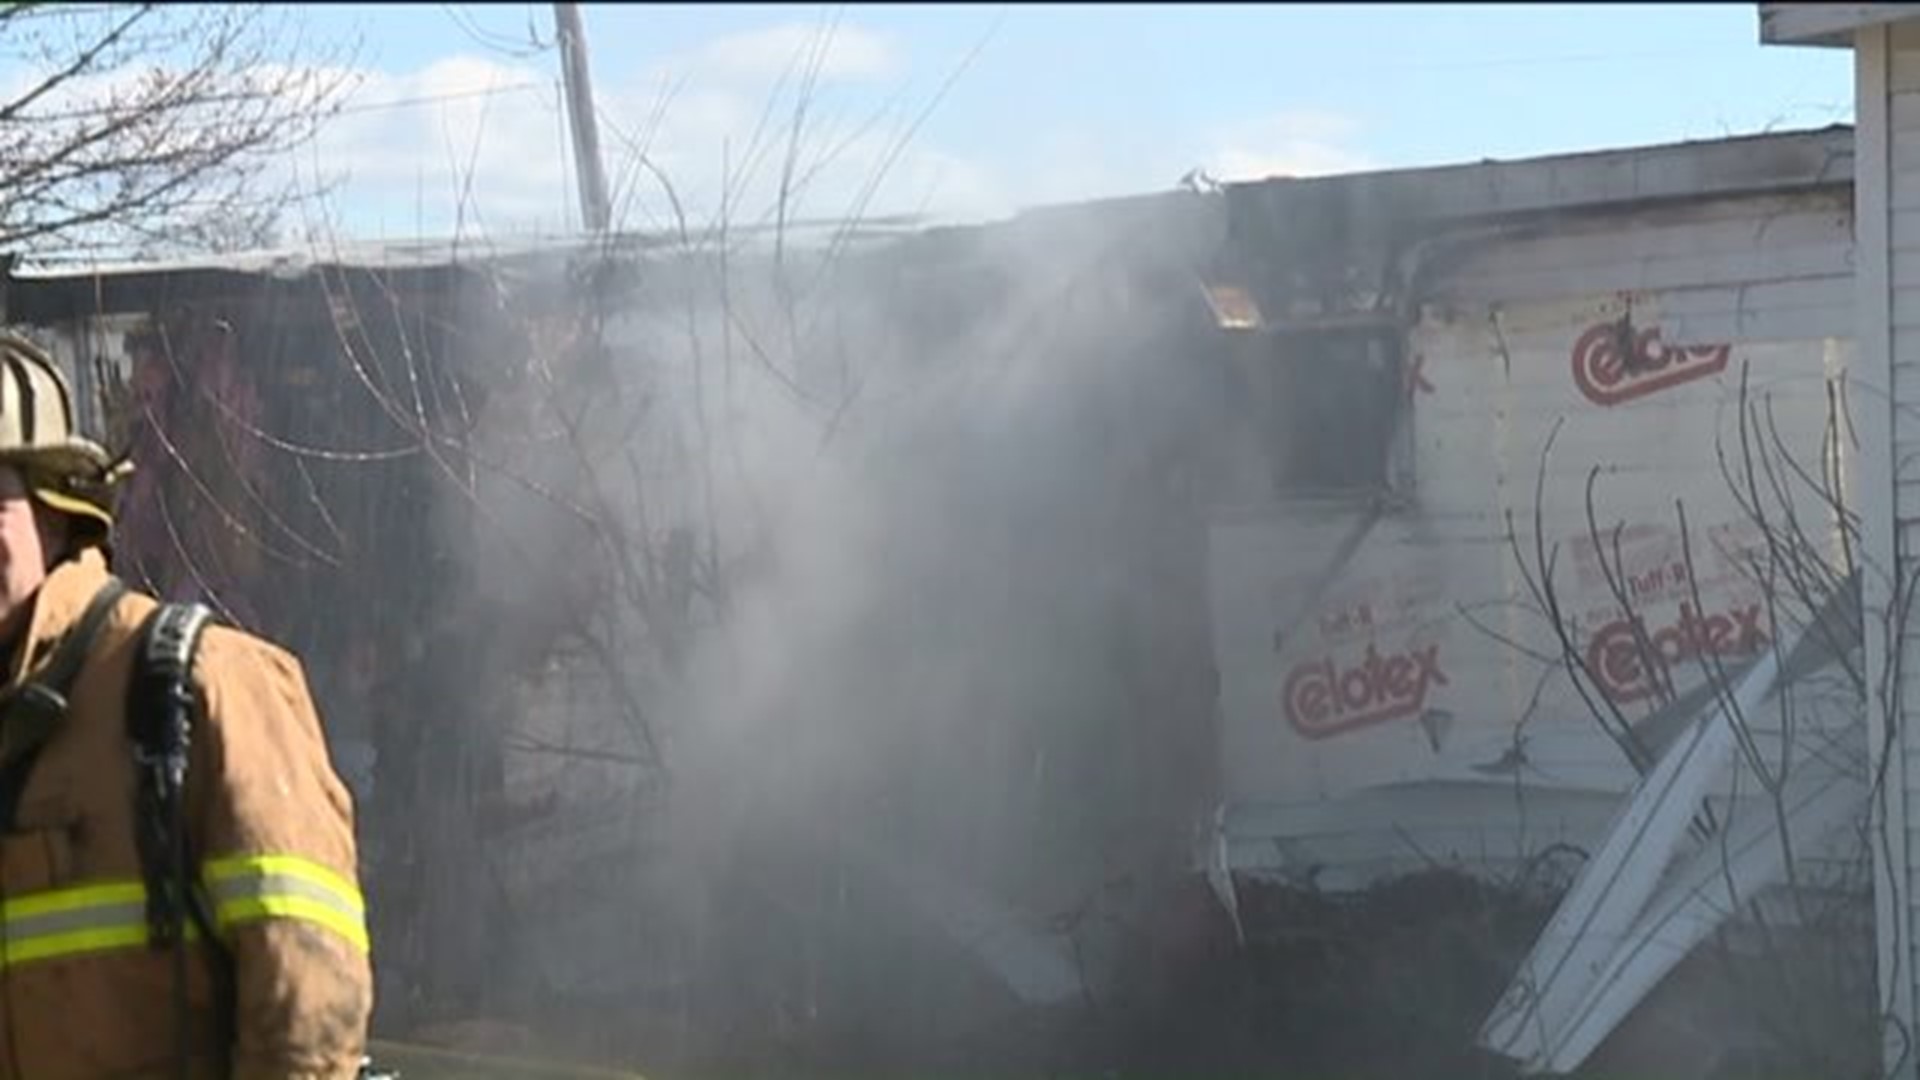 Mobile Home Gutted by Fire